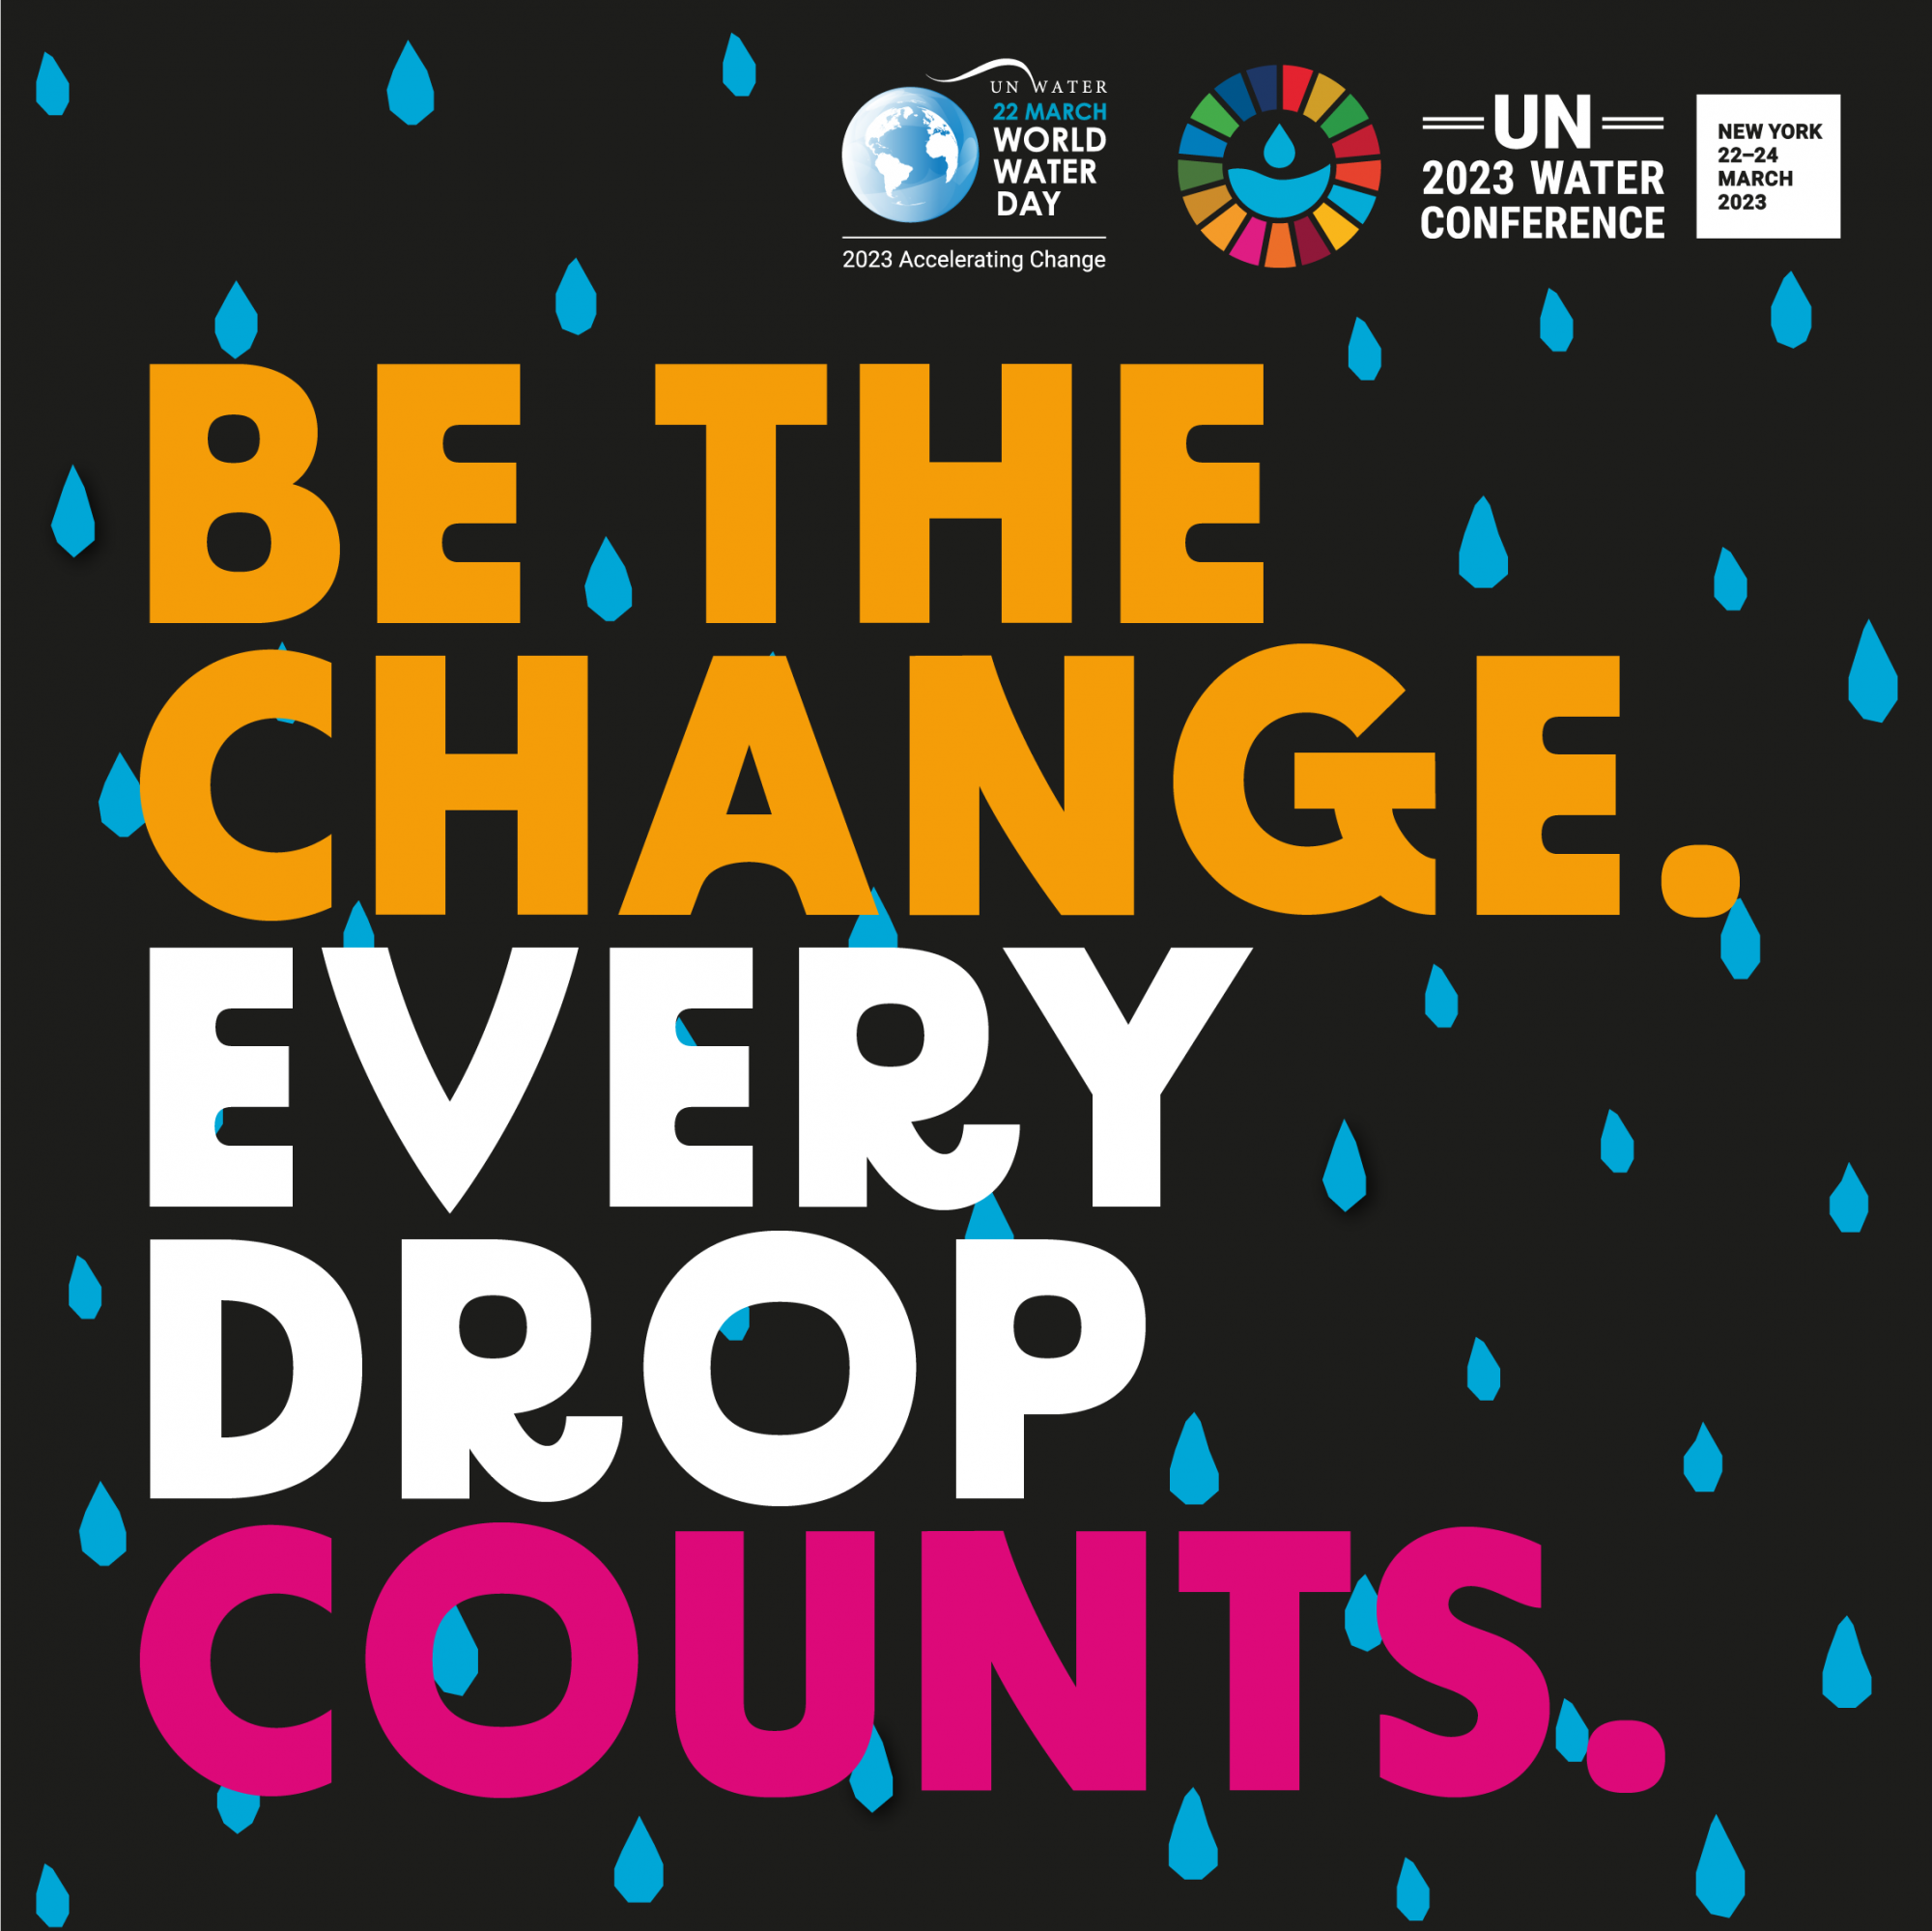 Illustrative image for World Water Day 2023, including text "Be the change. Every drop counts."